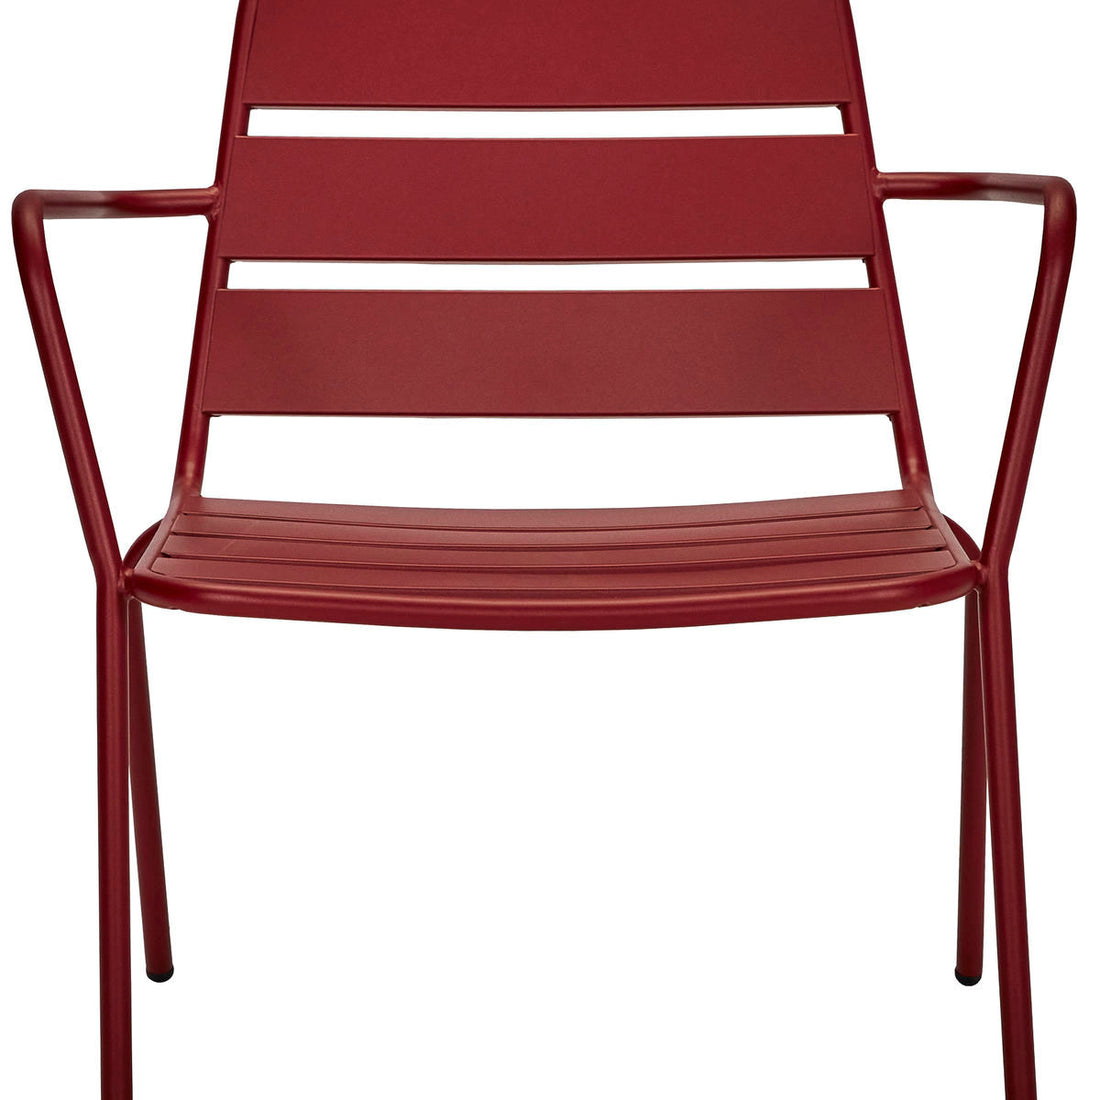 House Doctor Lounge Chair, Hdhelo, Rot